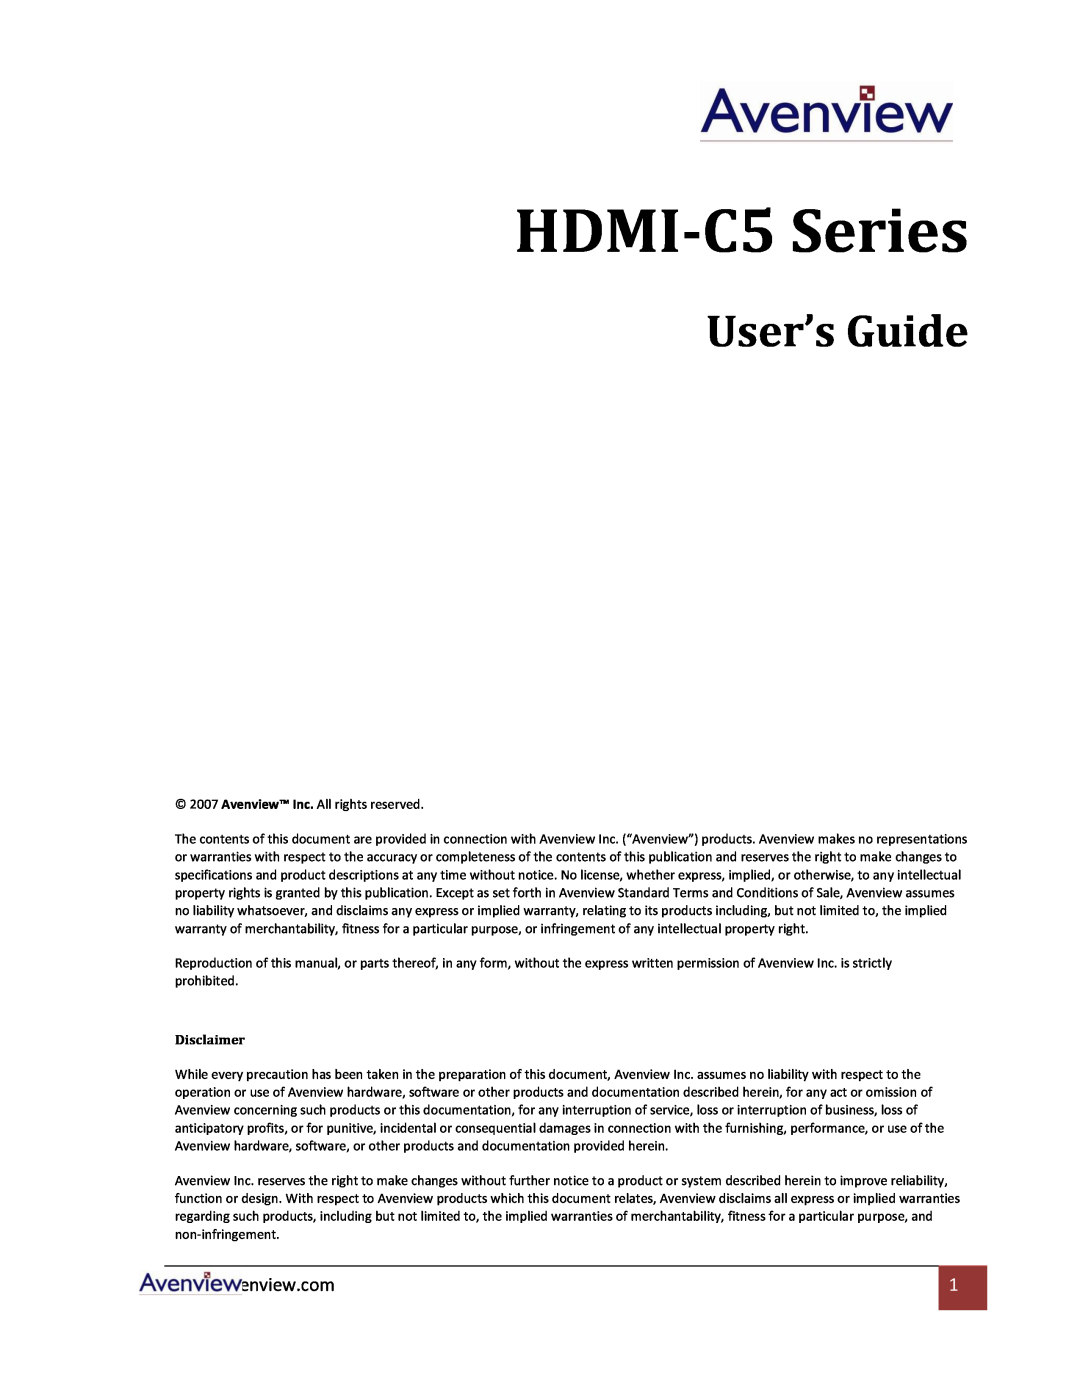 Avenview specifications HDMI-C5 Series, User’s Guide, Disclaimer 